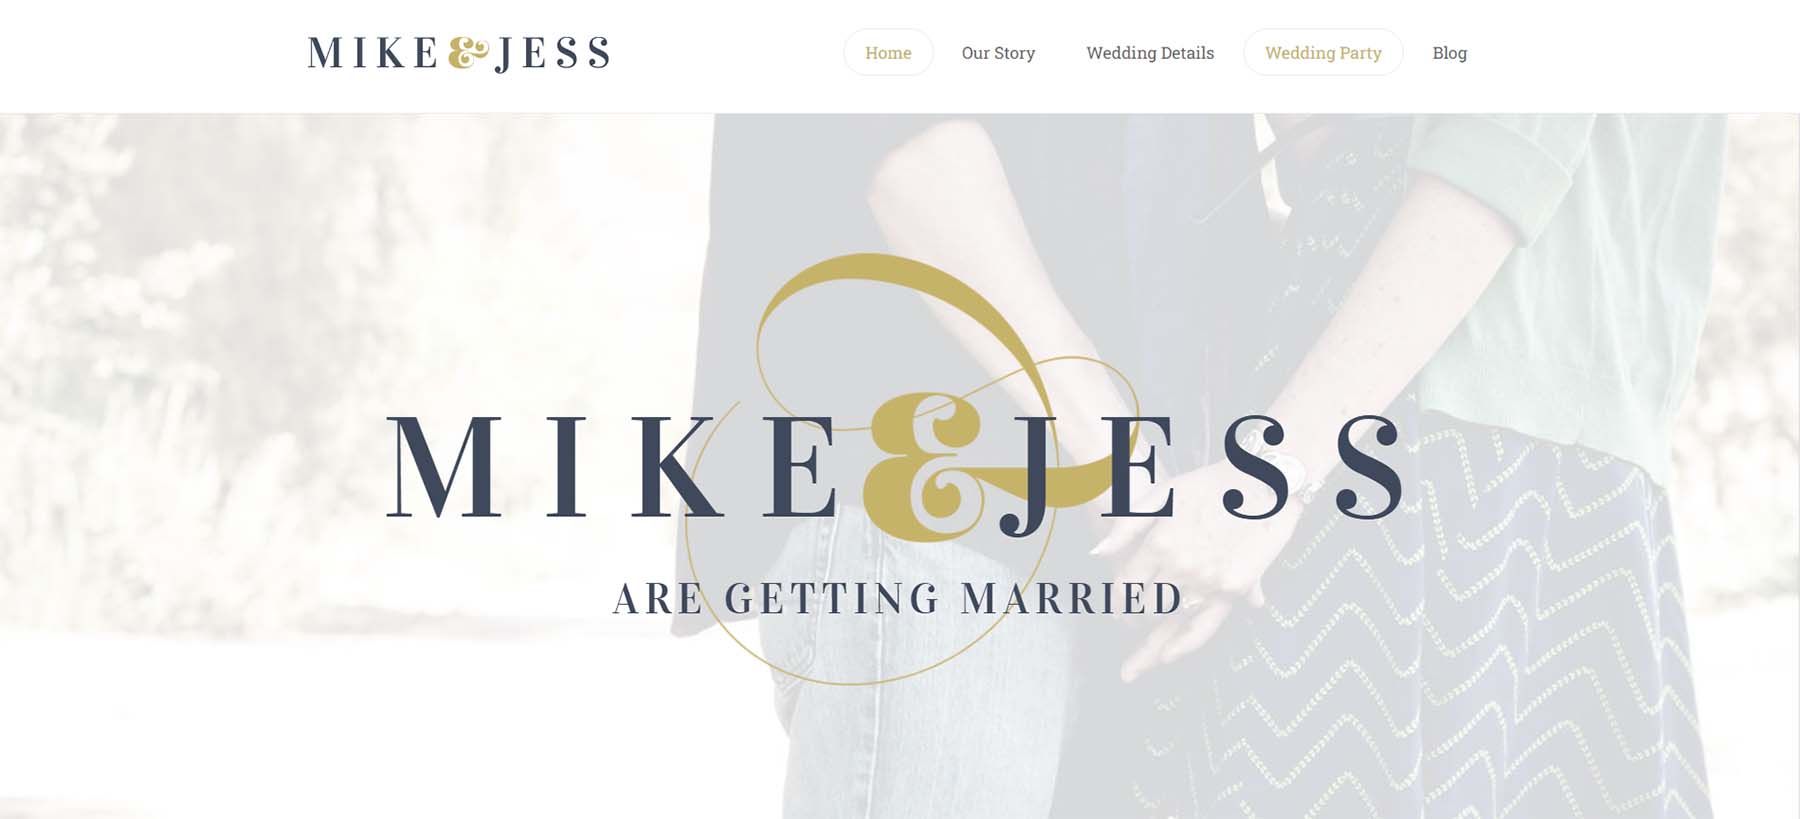 X, one of the best WordPress Wedding Themes for Wedding Invitations